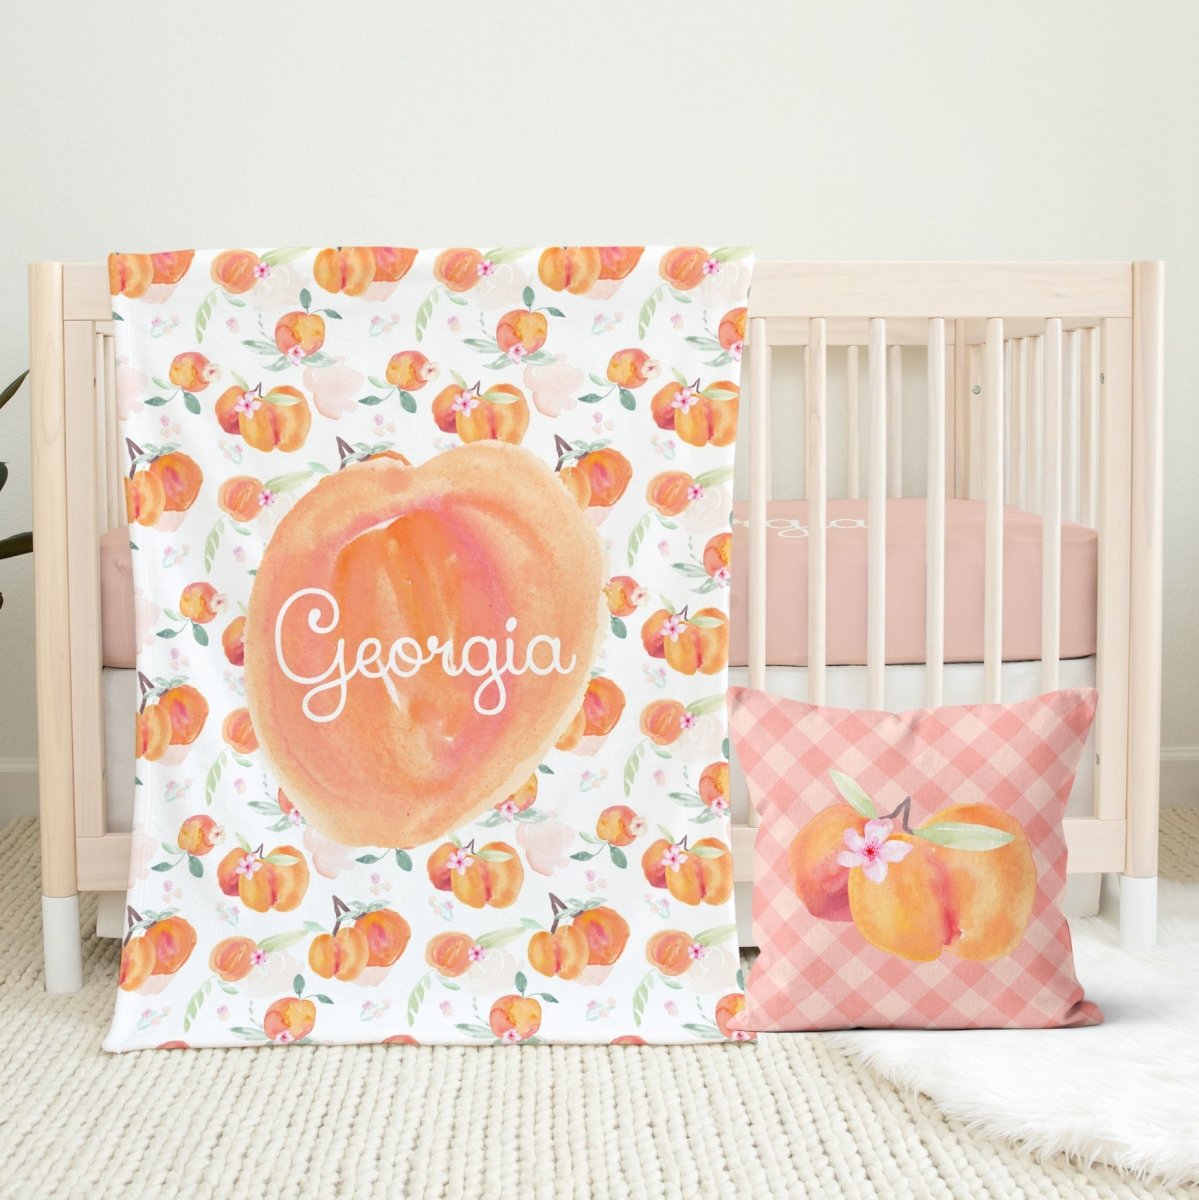 Sweet Georgia Peach Personalized Crib Sheet - gender_girl, Personalized_Yes, text